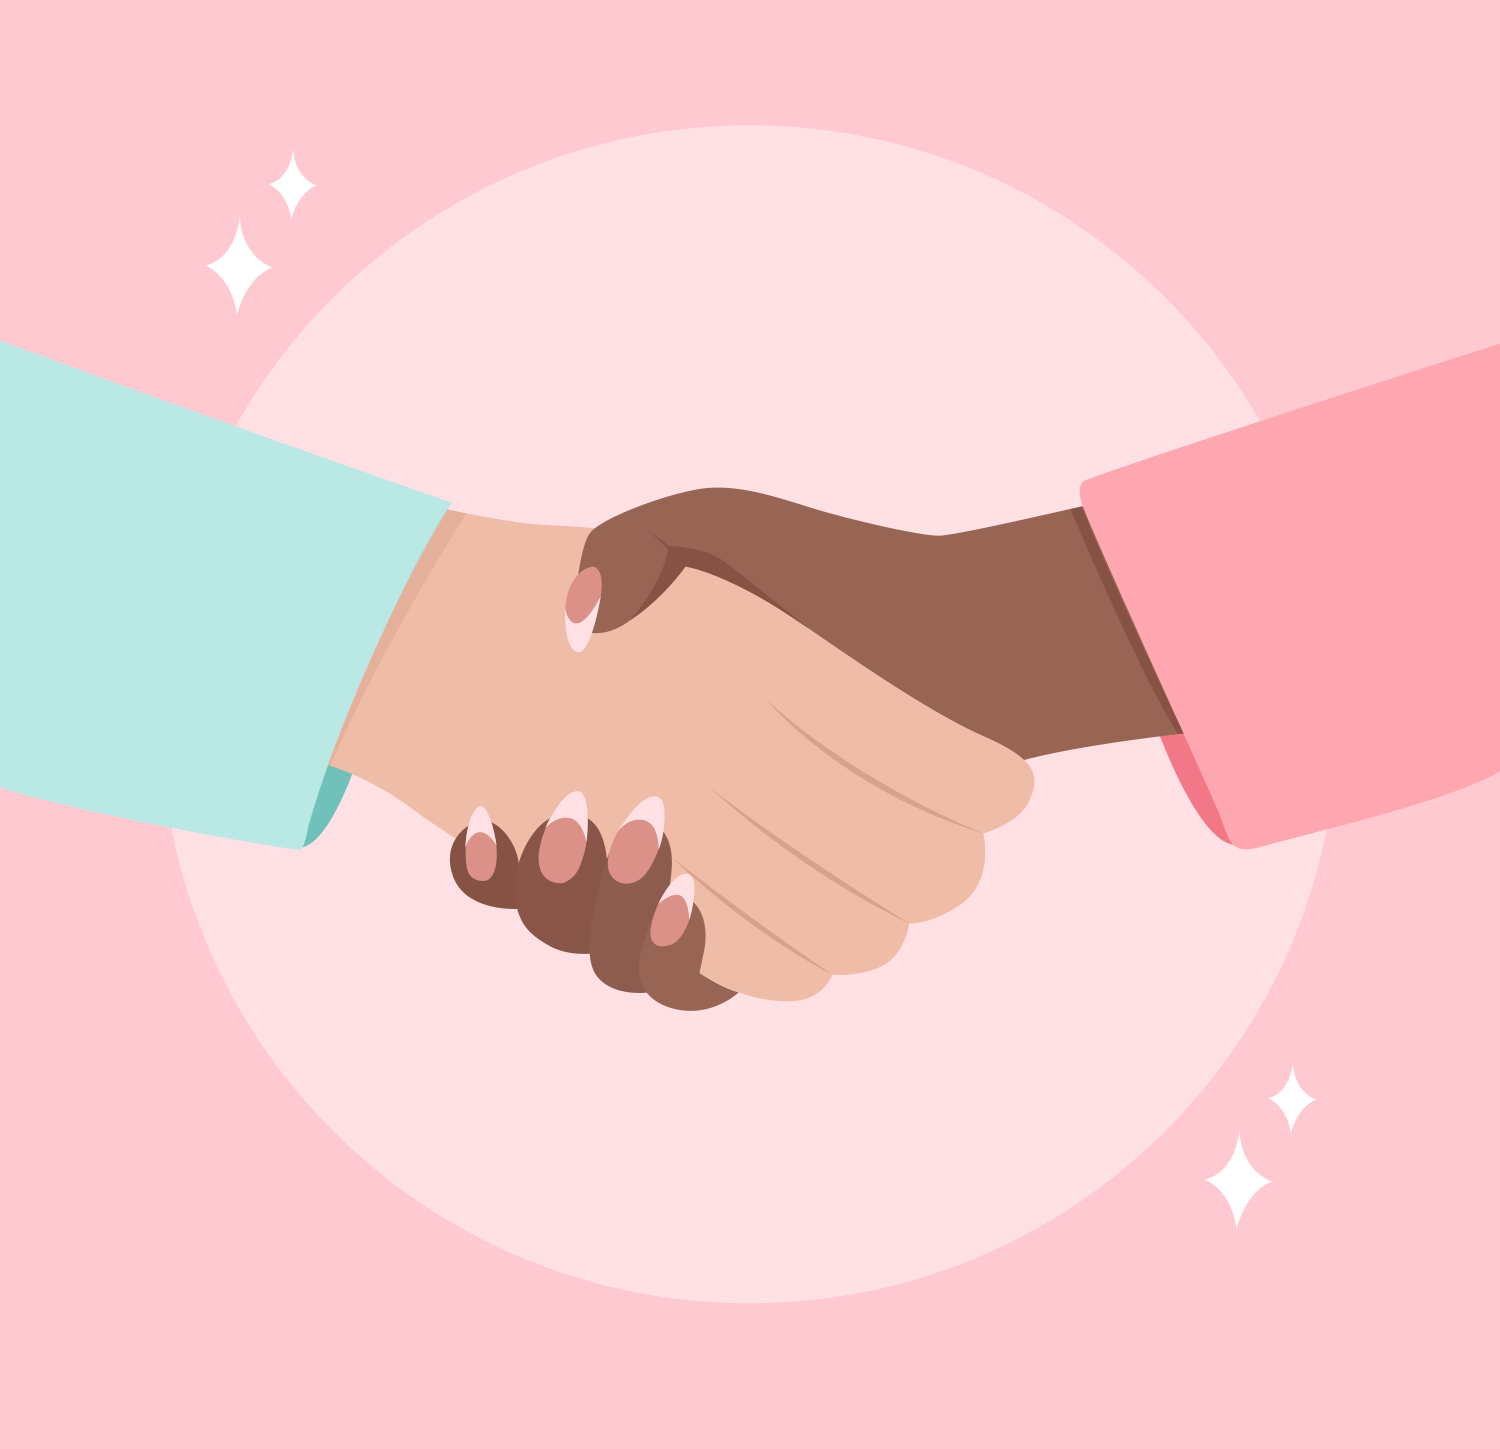 Business Etiquette: Two cartoon hands shake against a pink background.